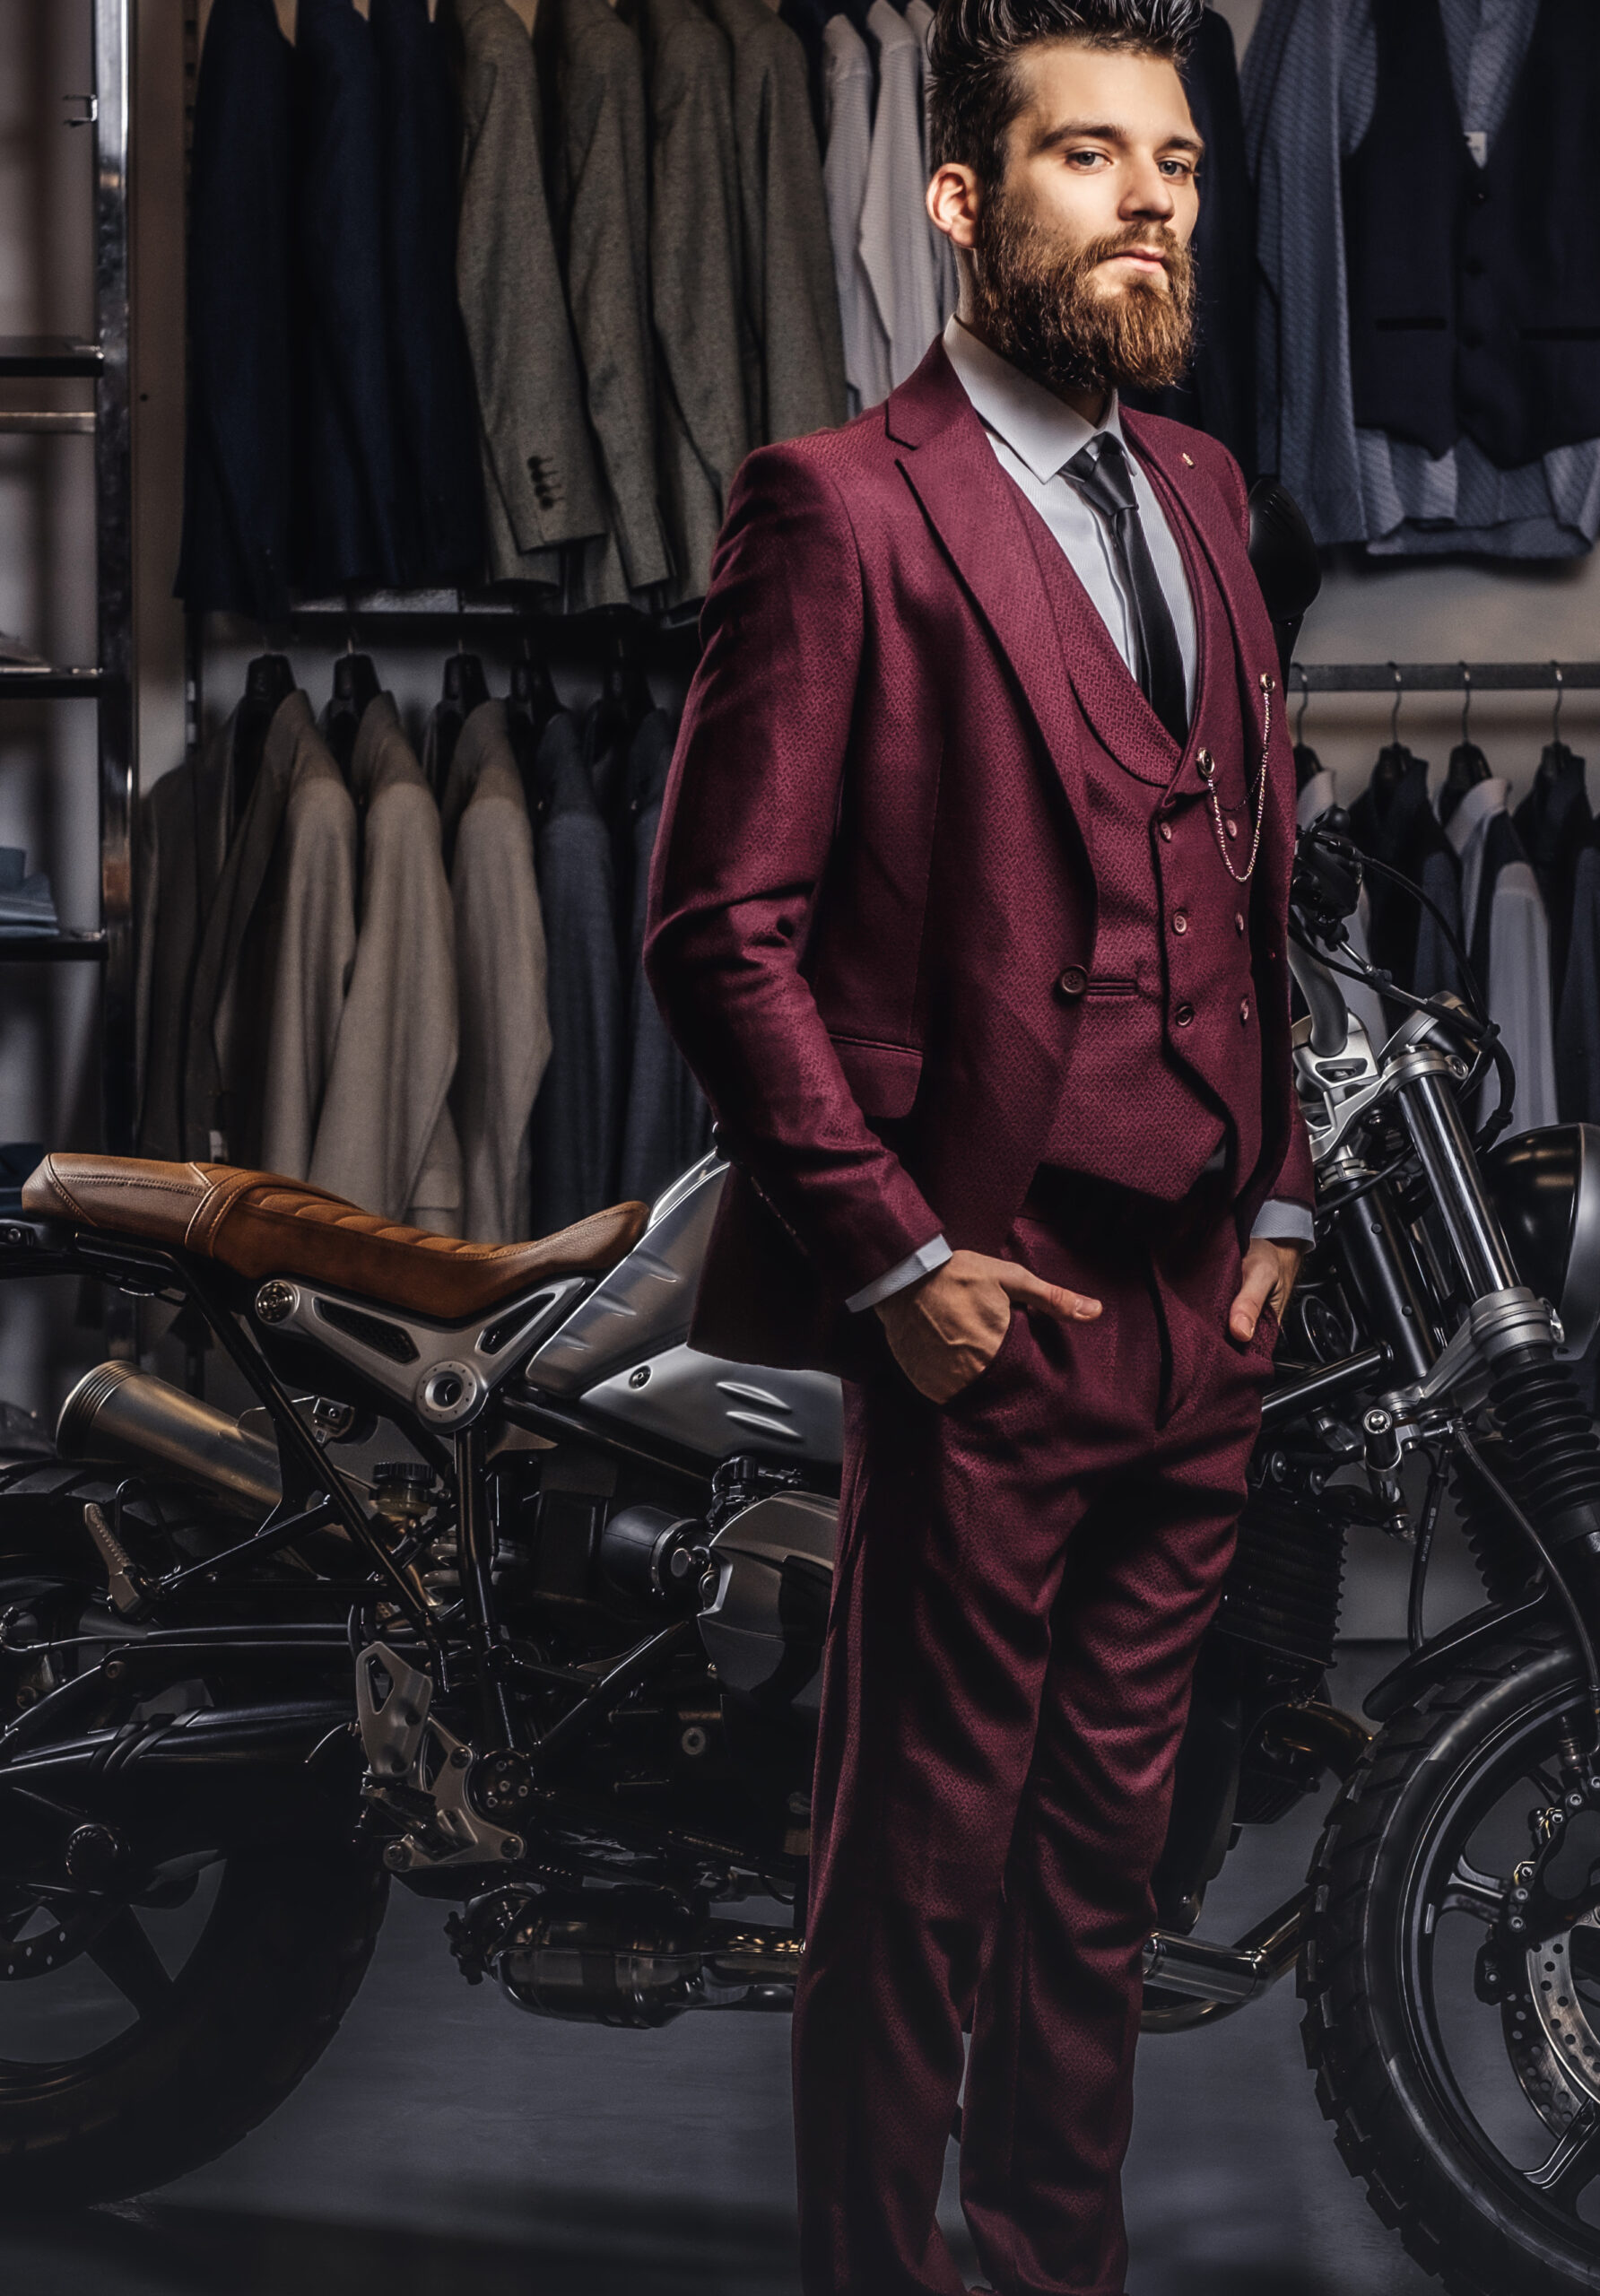 Stylish handsome man dressed in vintage red suit posing  with hands in pockets near retro sports motorbike at men's clothing store.